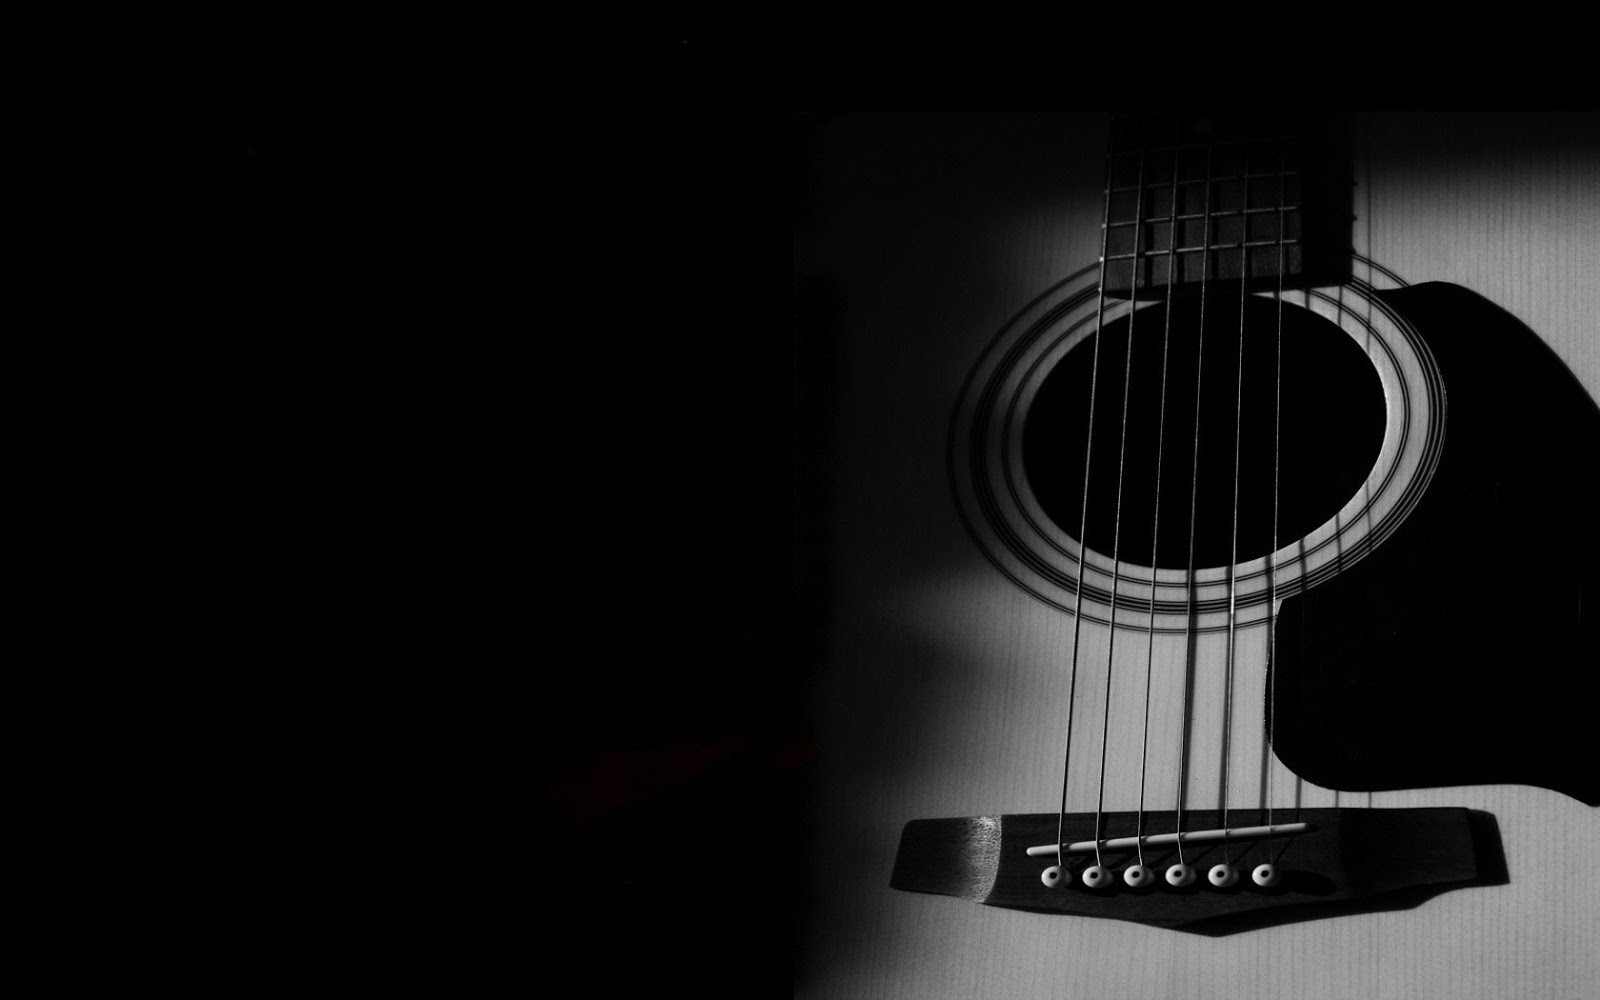  hd so get free download guitar wallpapers and make your desktop cool